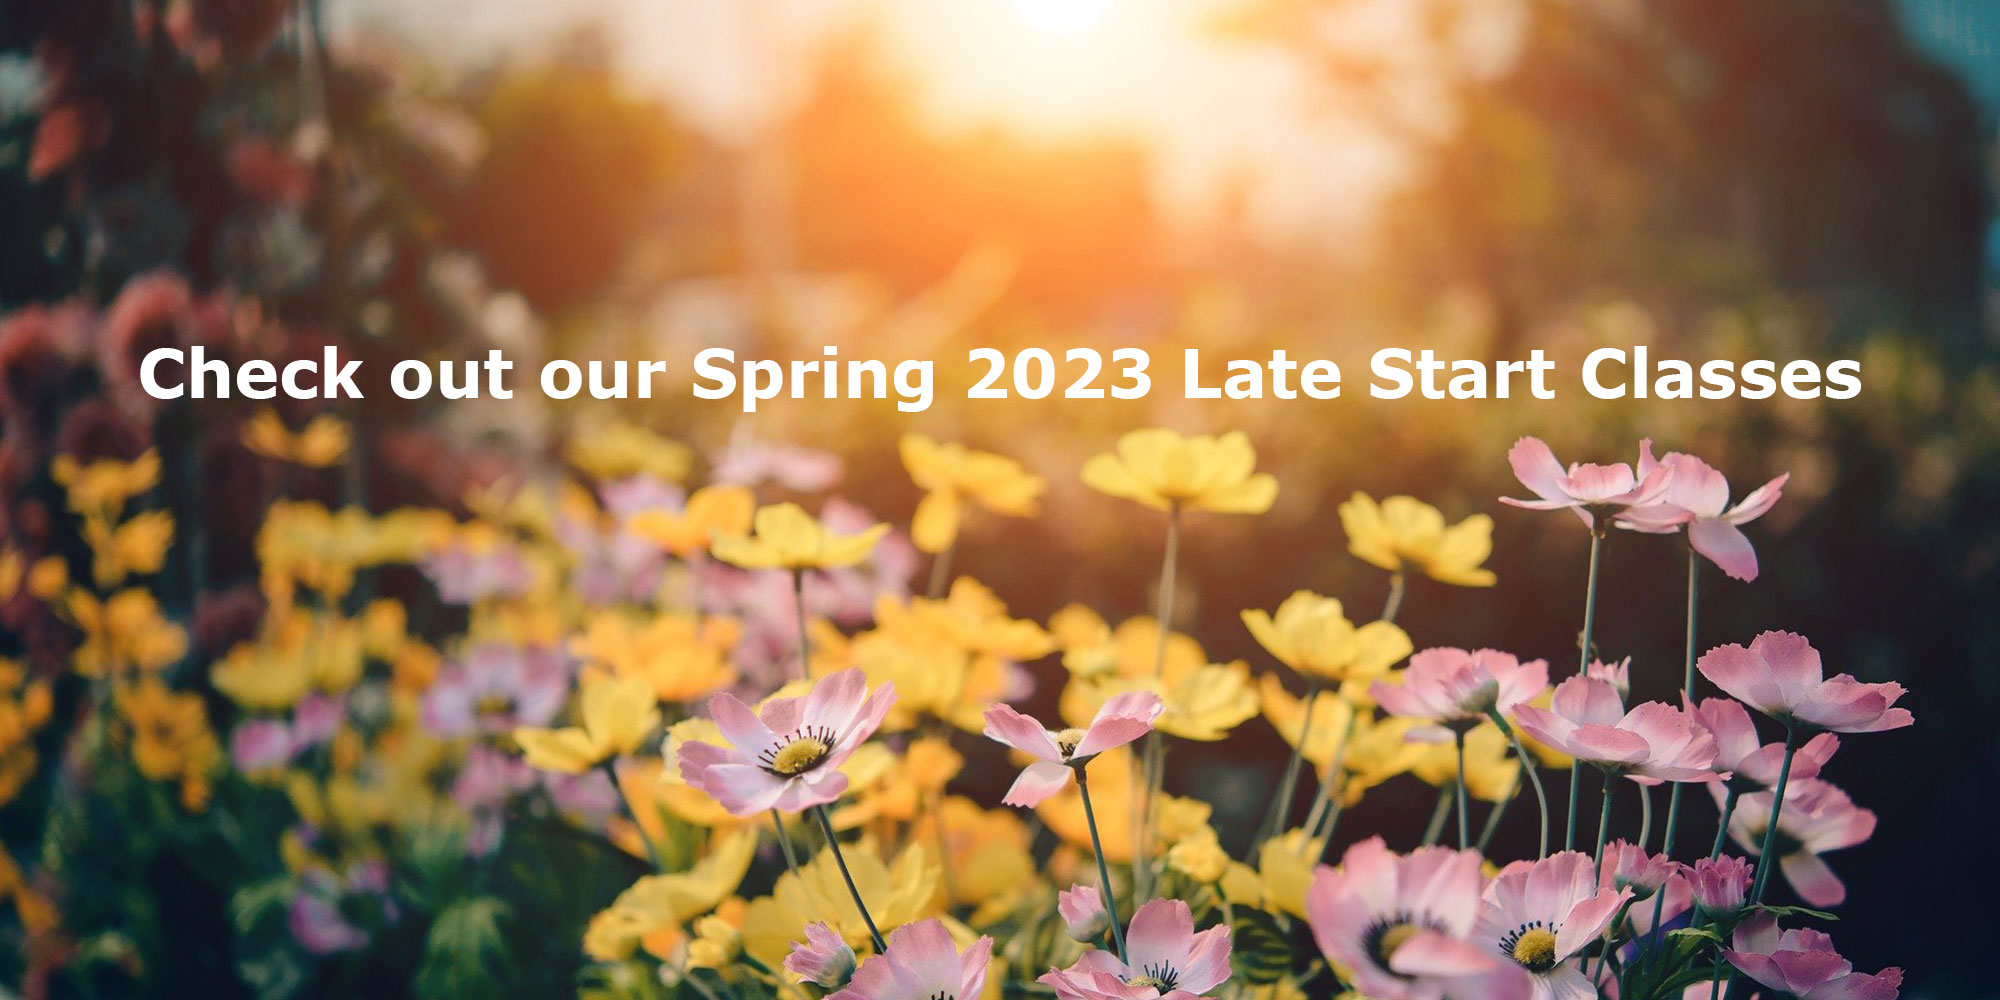 Check out our Spring 2023 Late Start Classes.